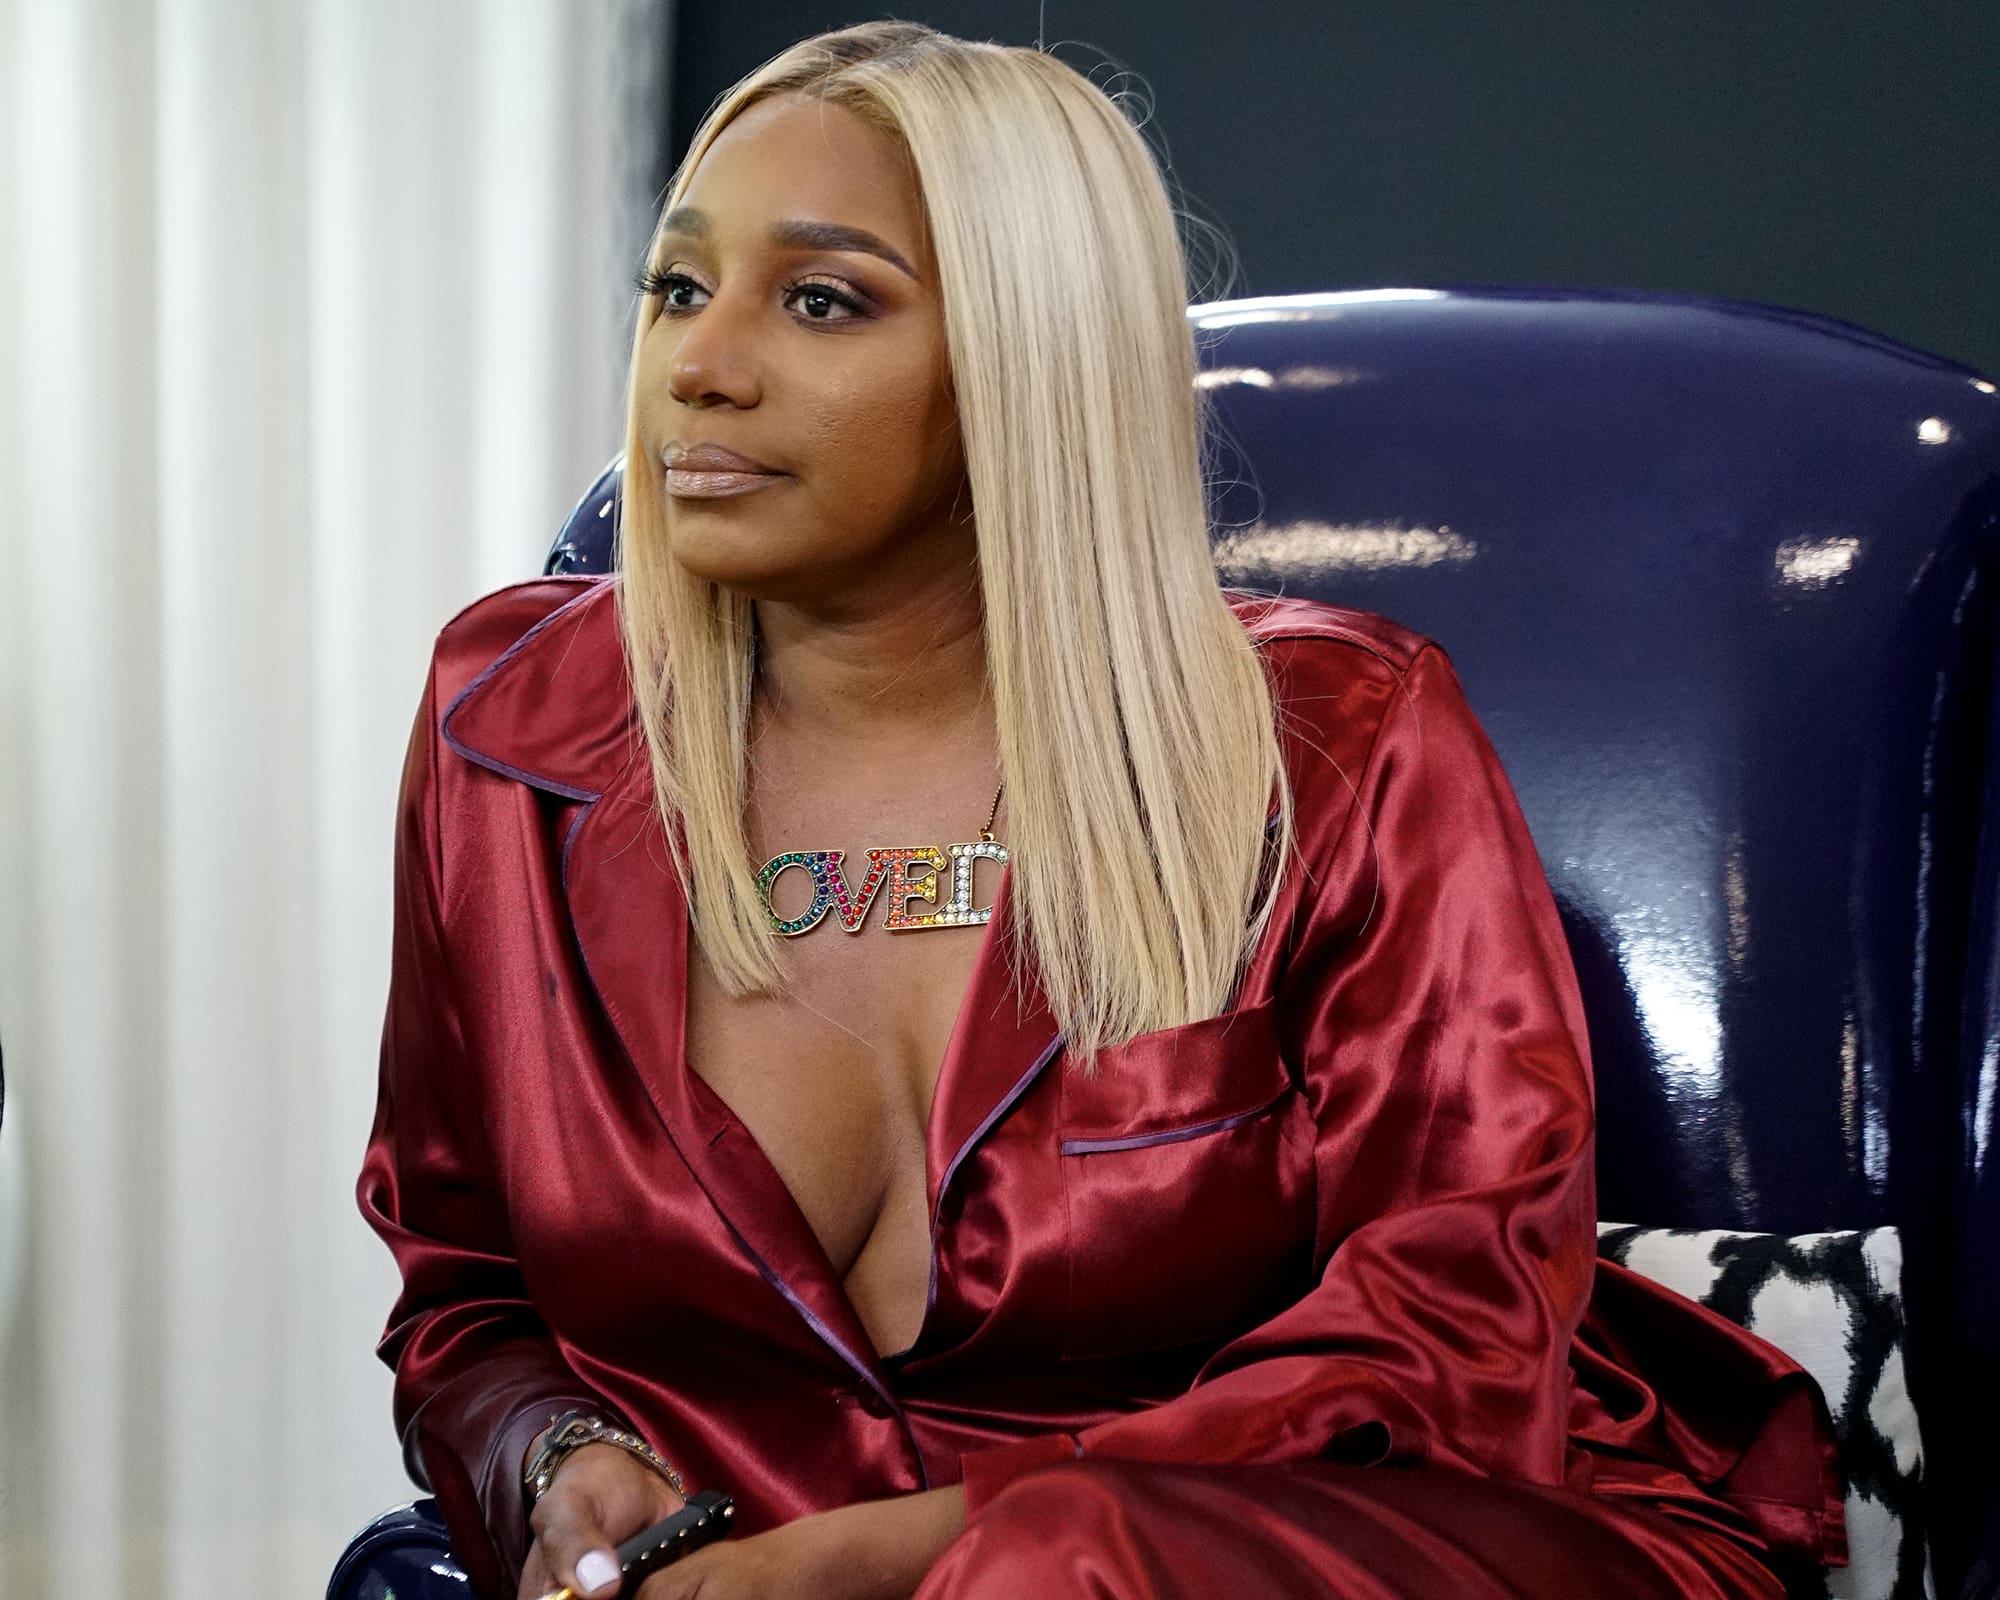 NeNe Leakes Says She's The Boss But Fans Criticize Her For Using Filters For Her Photos